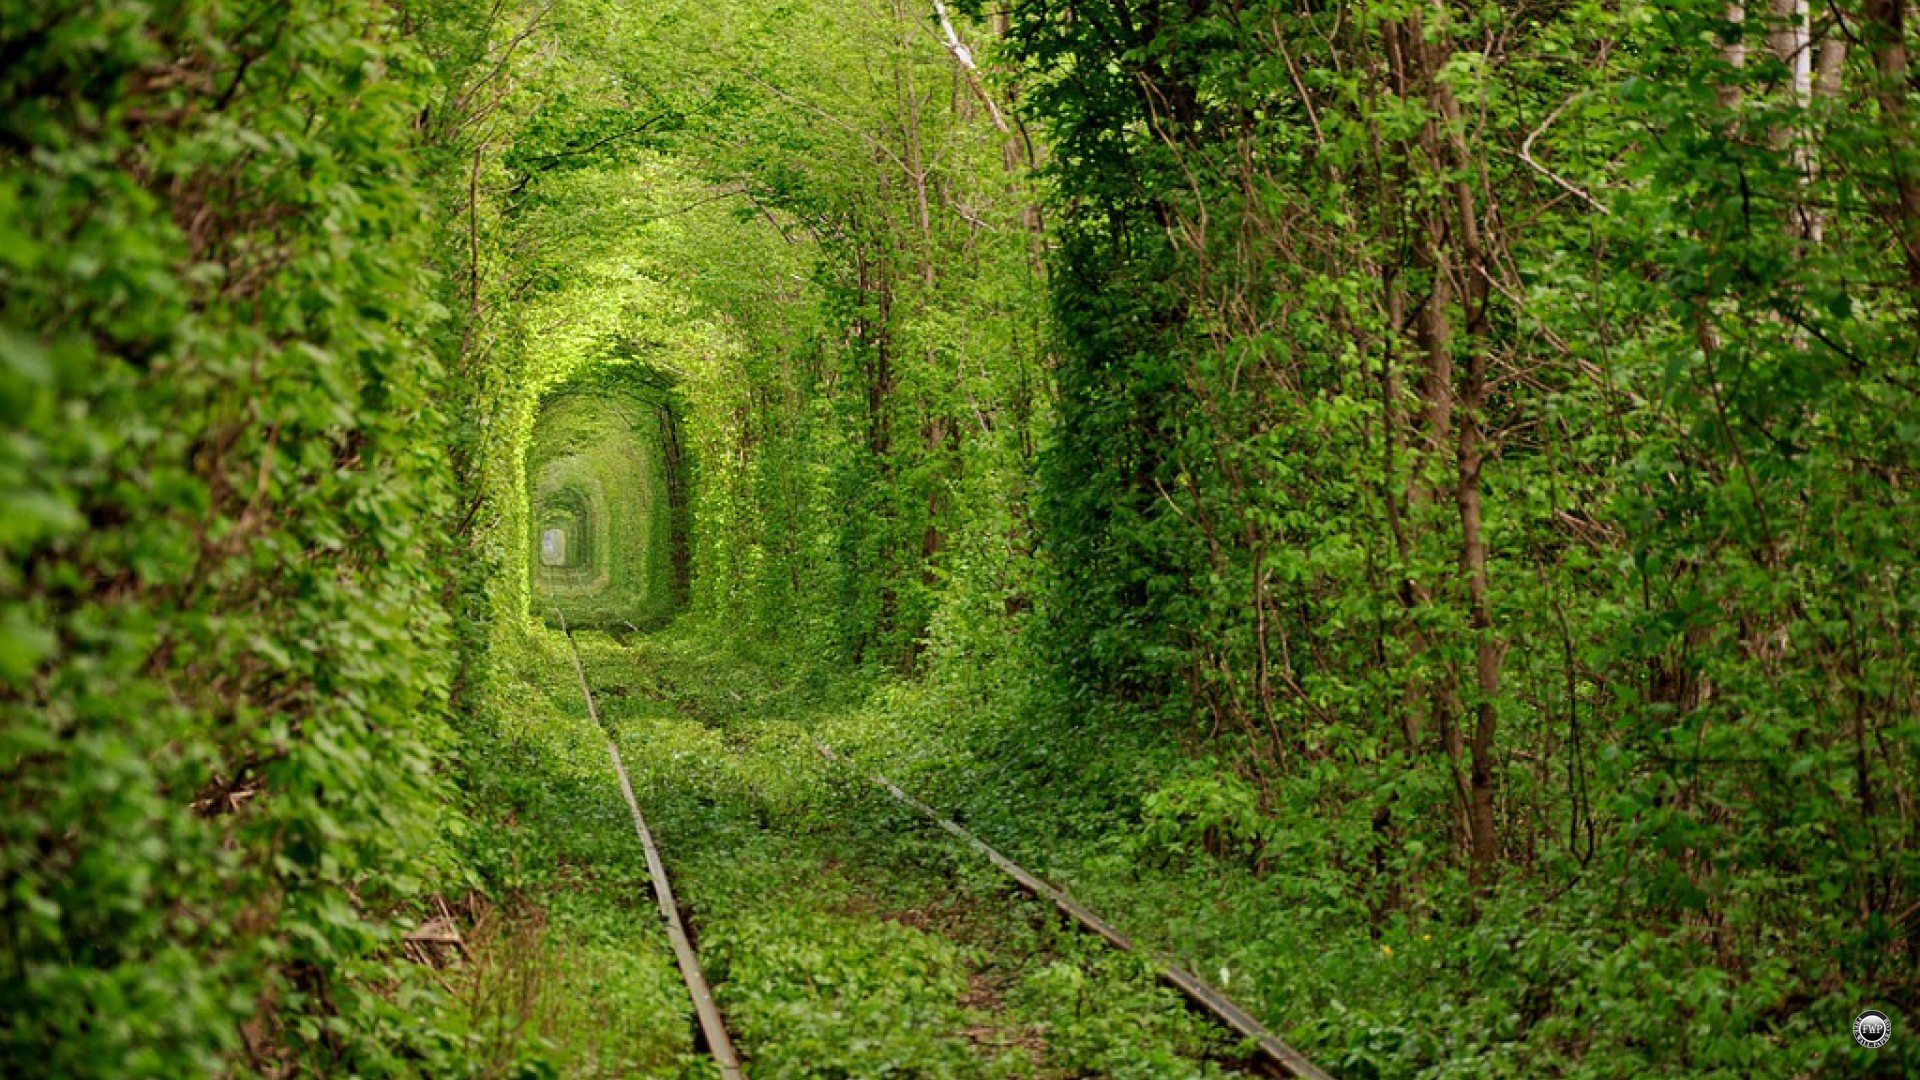 Tunnels from trees